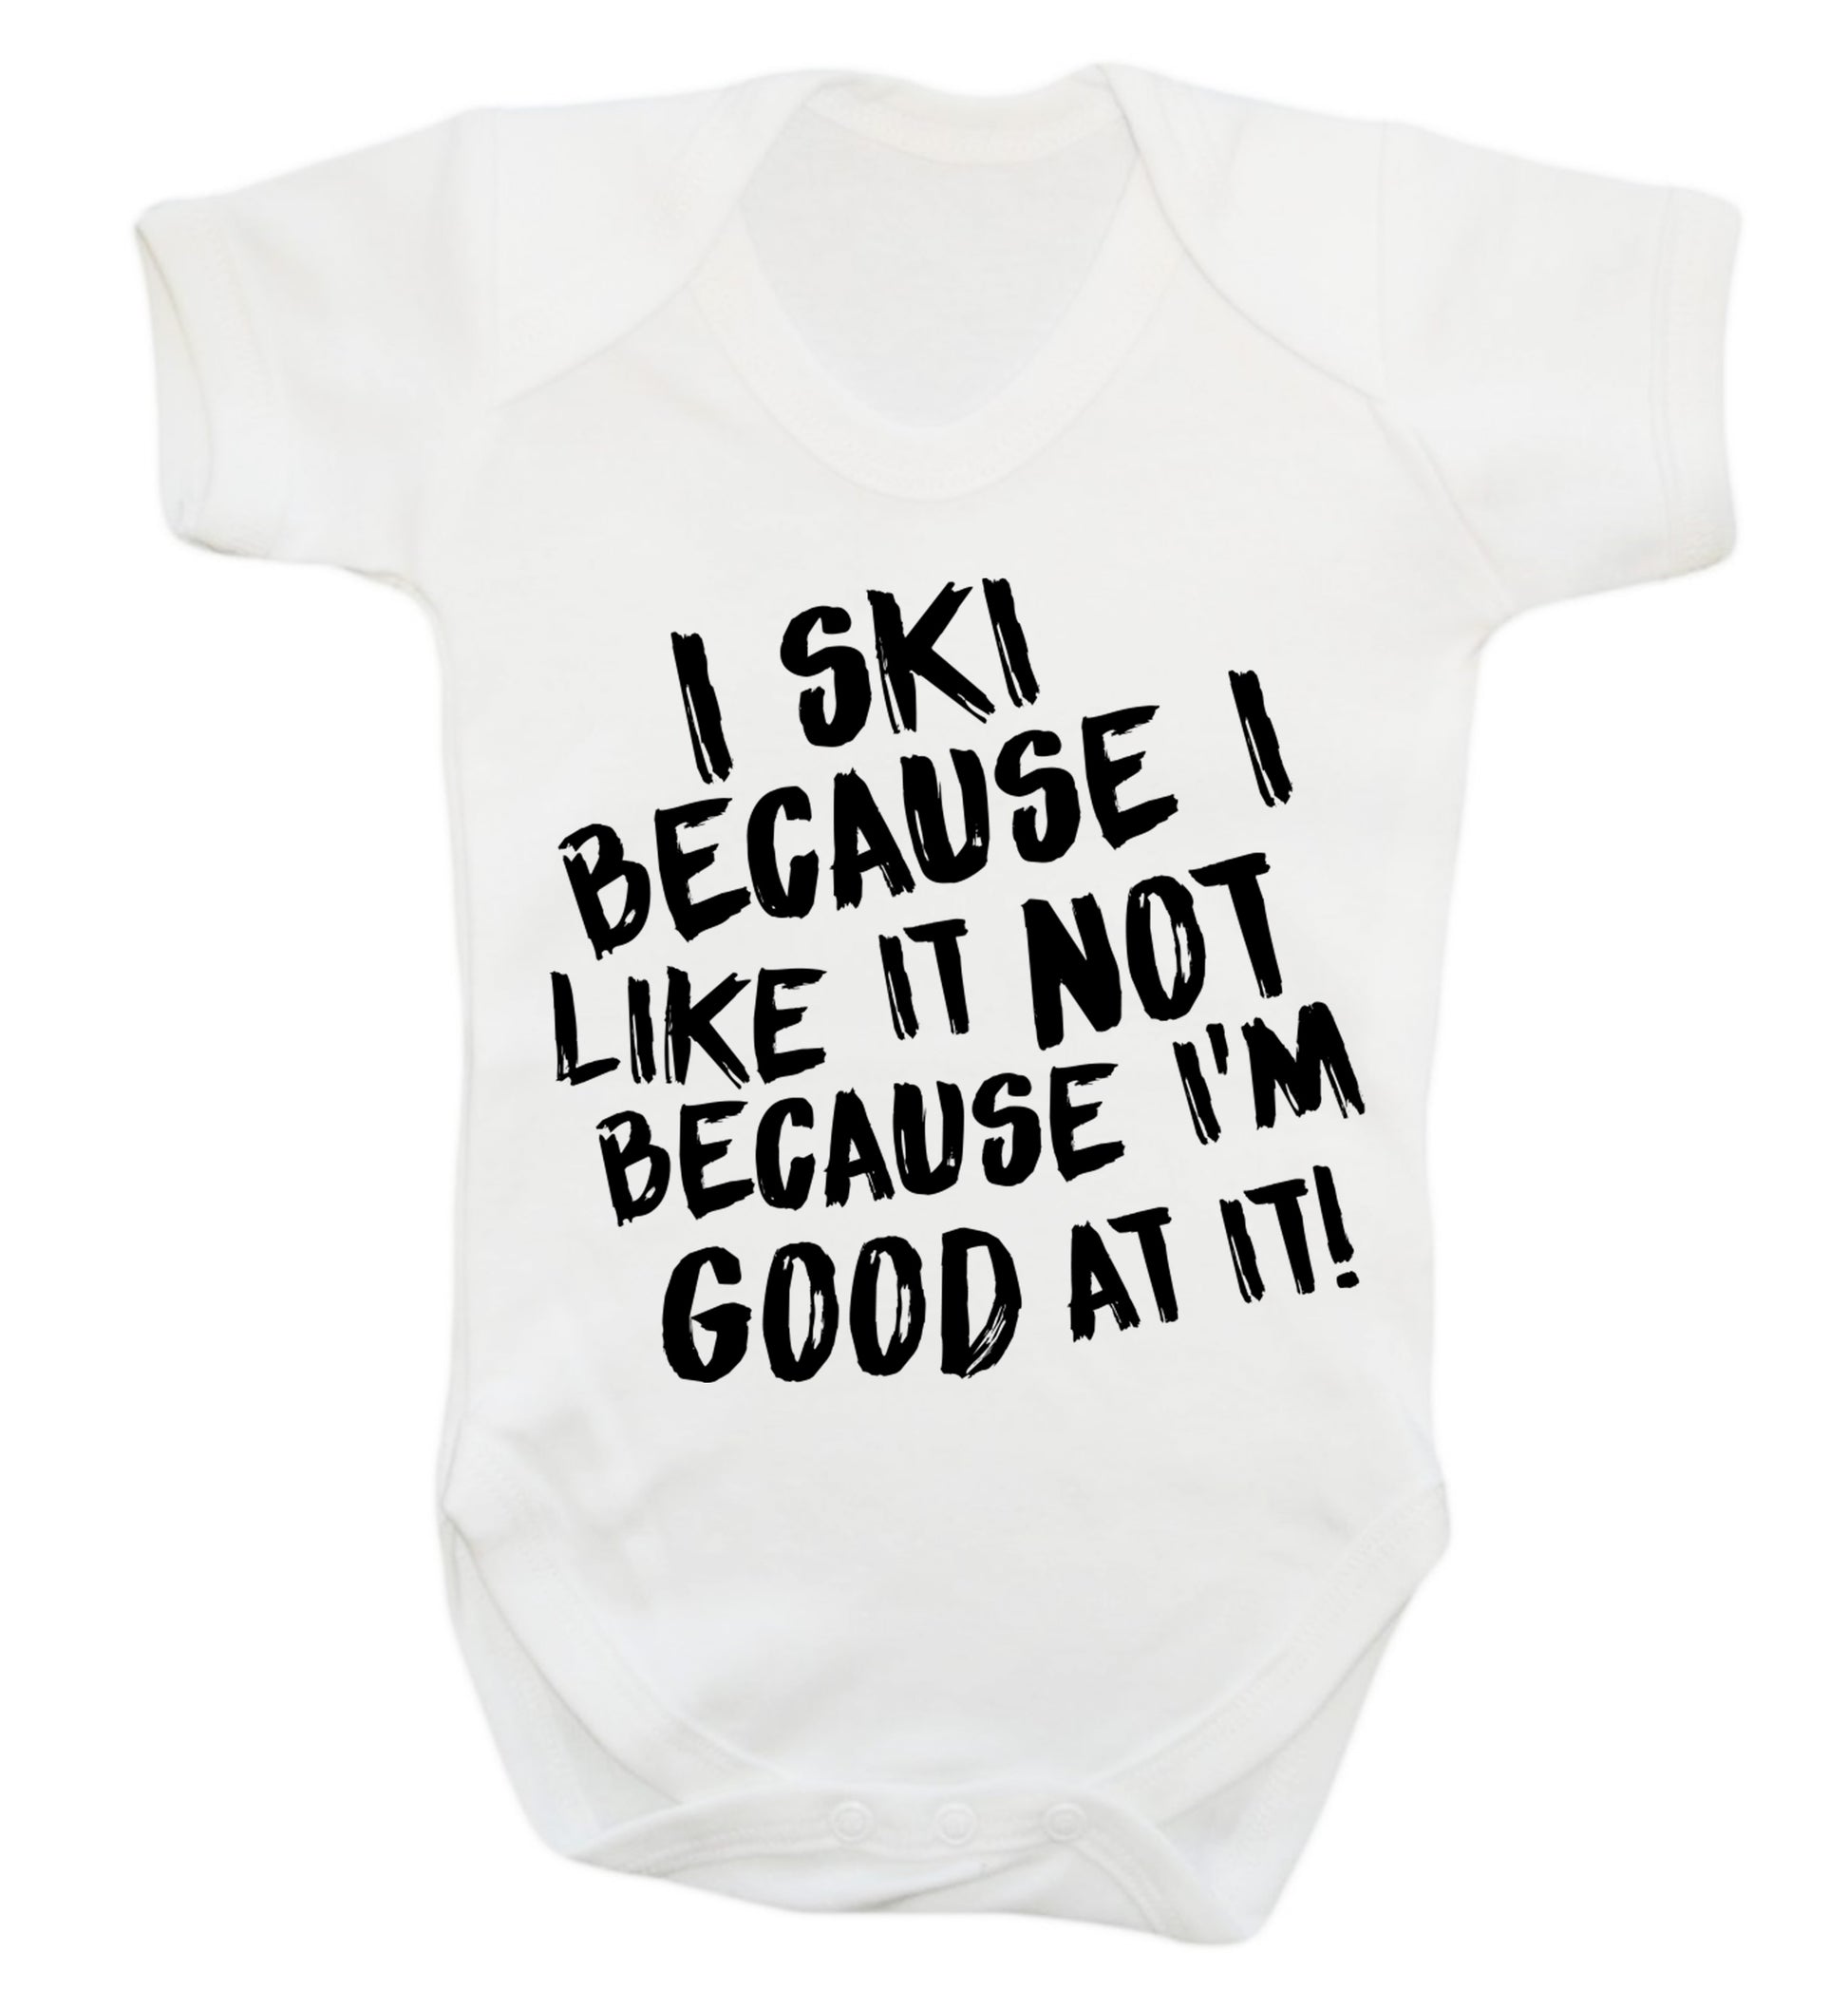 I ski because I like it not because I'm good at it Baby Vest white 18-24 months